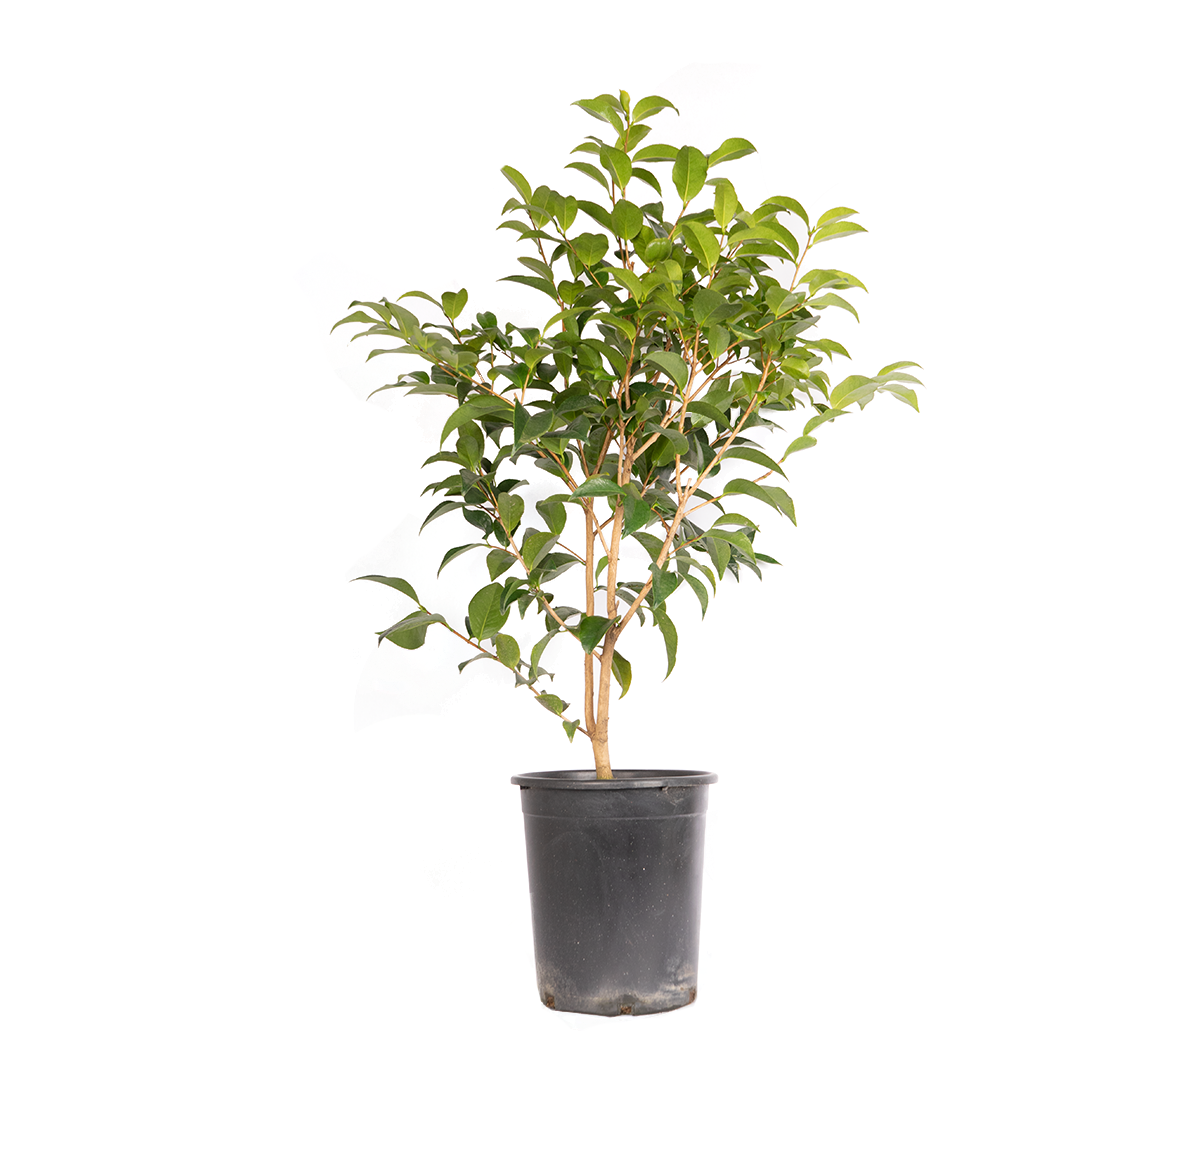 Camellia shrub with green leaves in a black nursery pot.